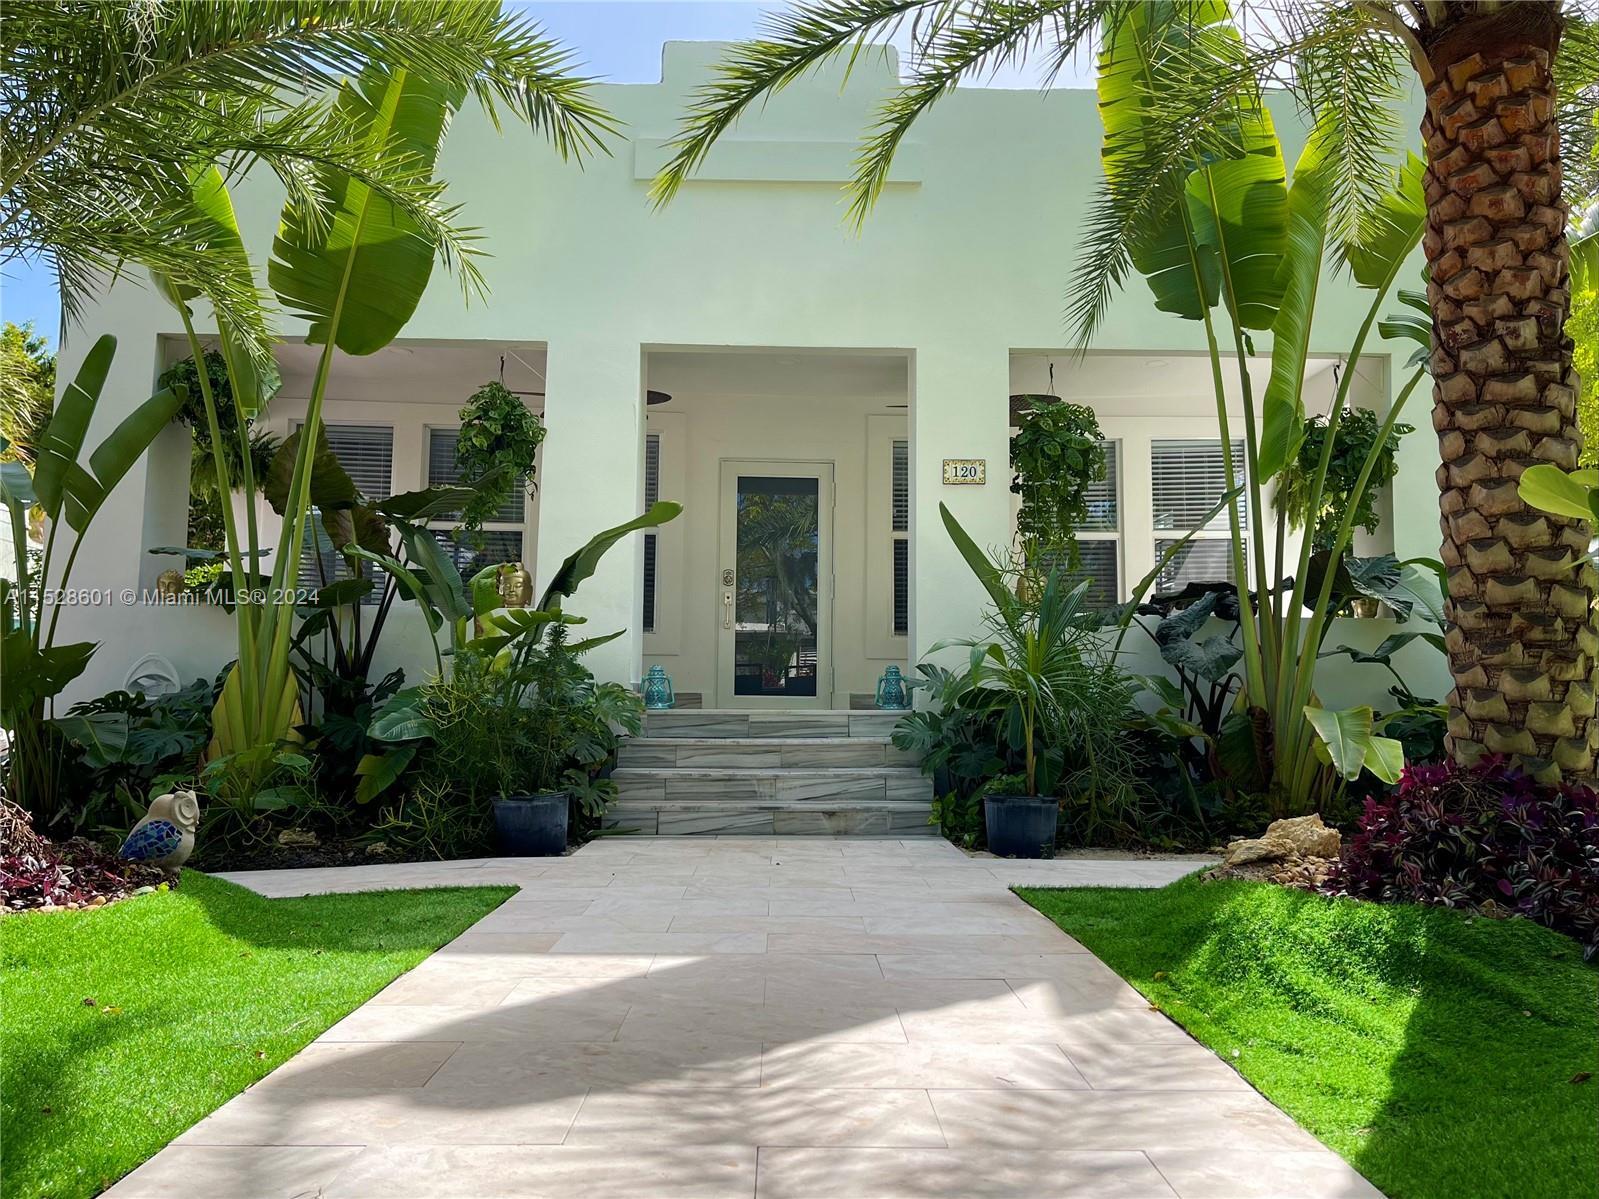 Photo of 120 NW 49th St in Miami, FL